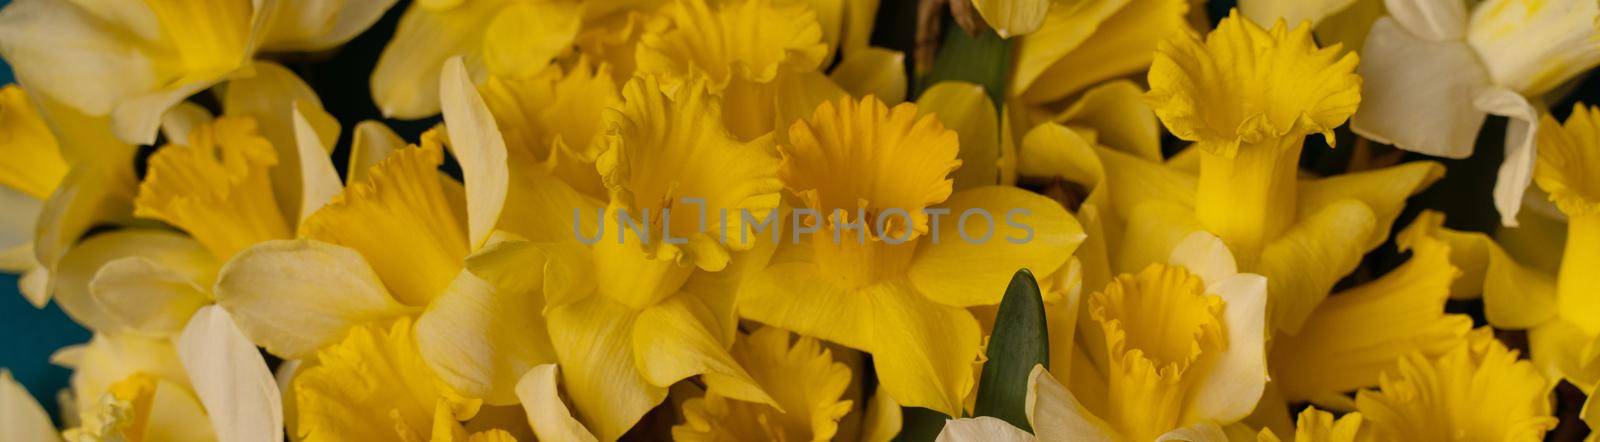 Romantic banner, delicate yellow daffodils flowers close-up. Full size. by Matiunina